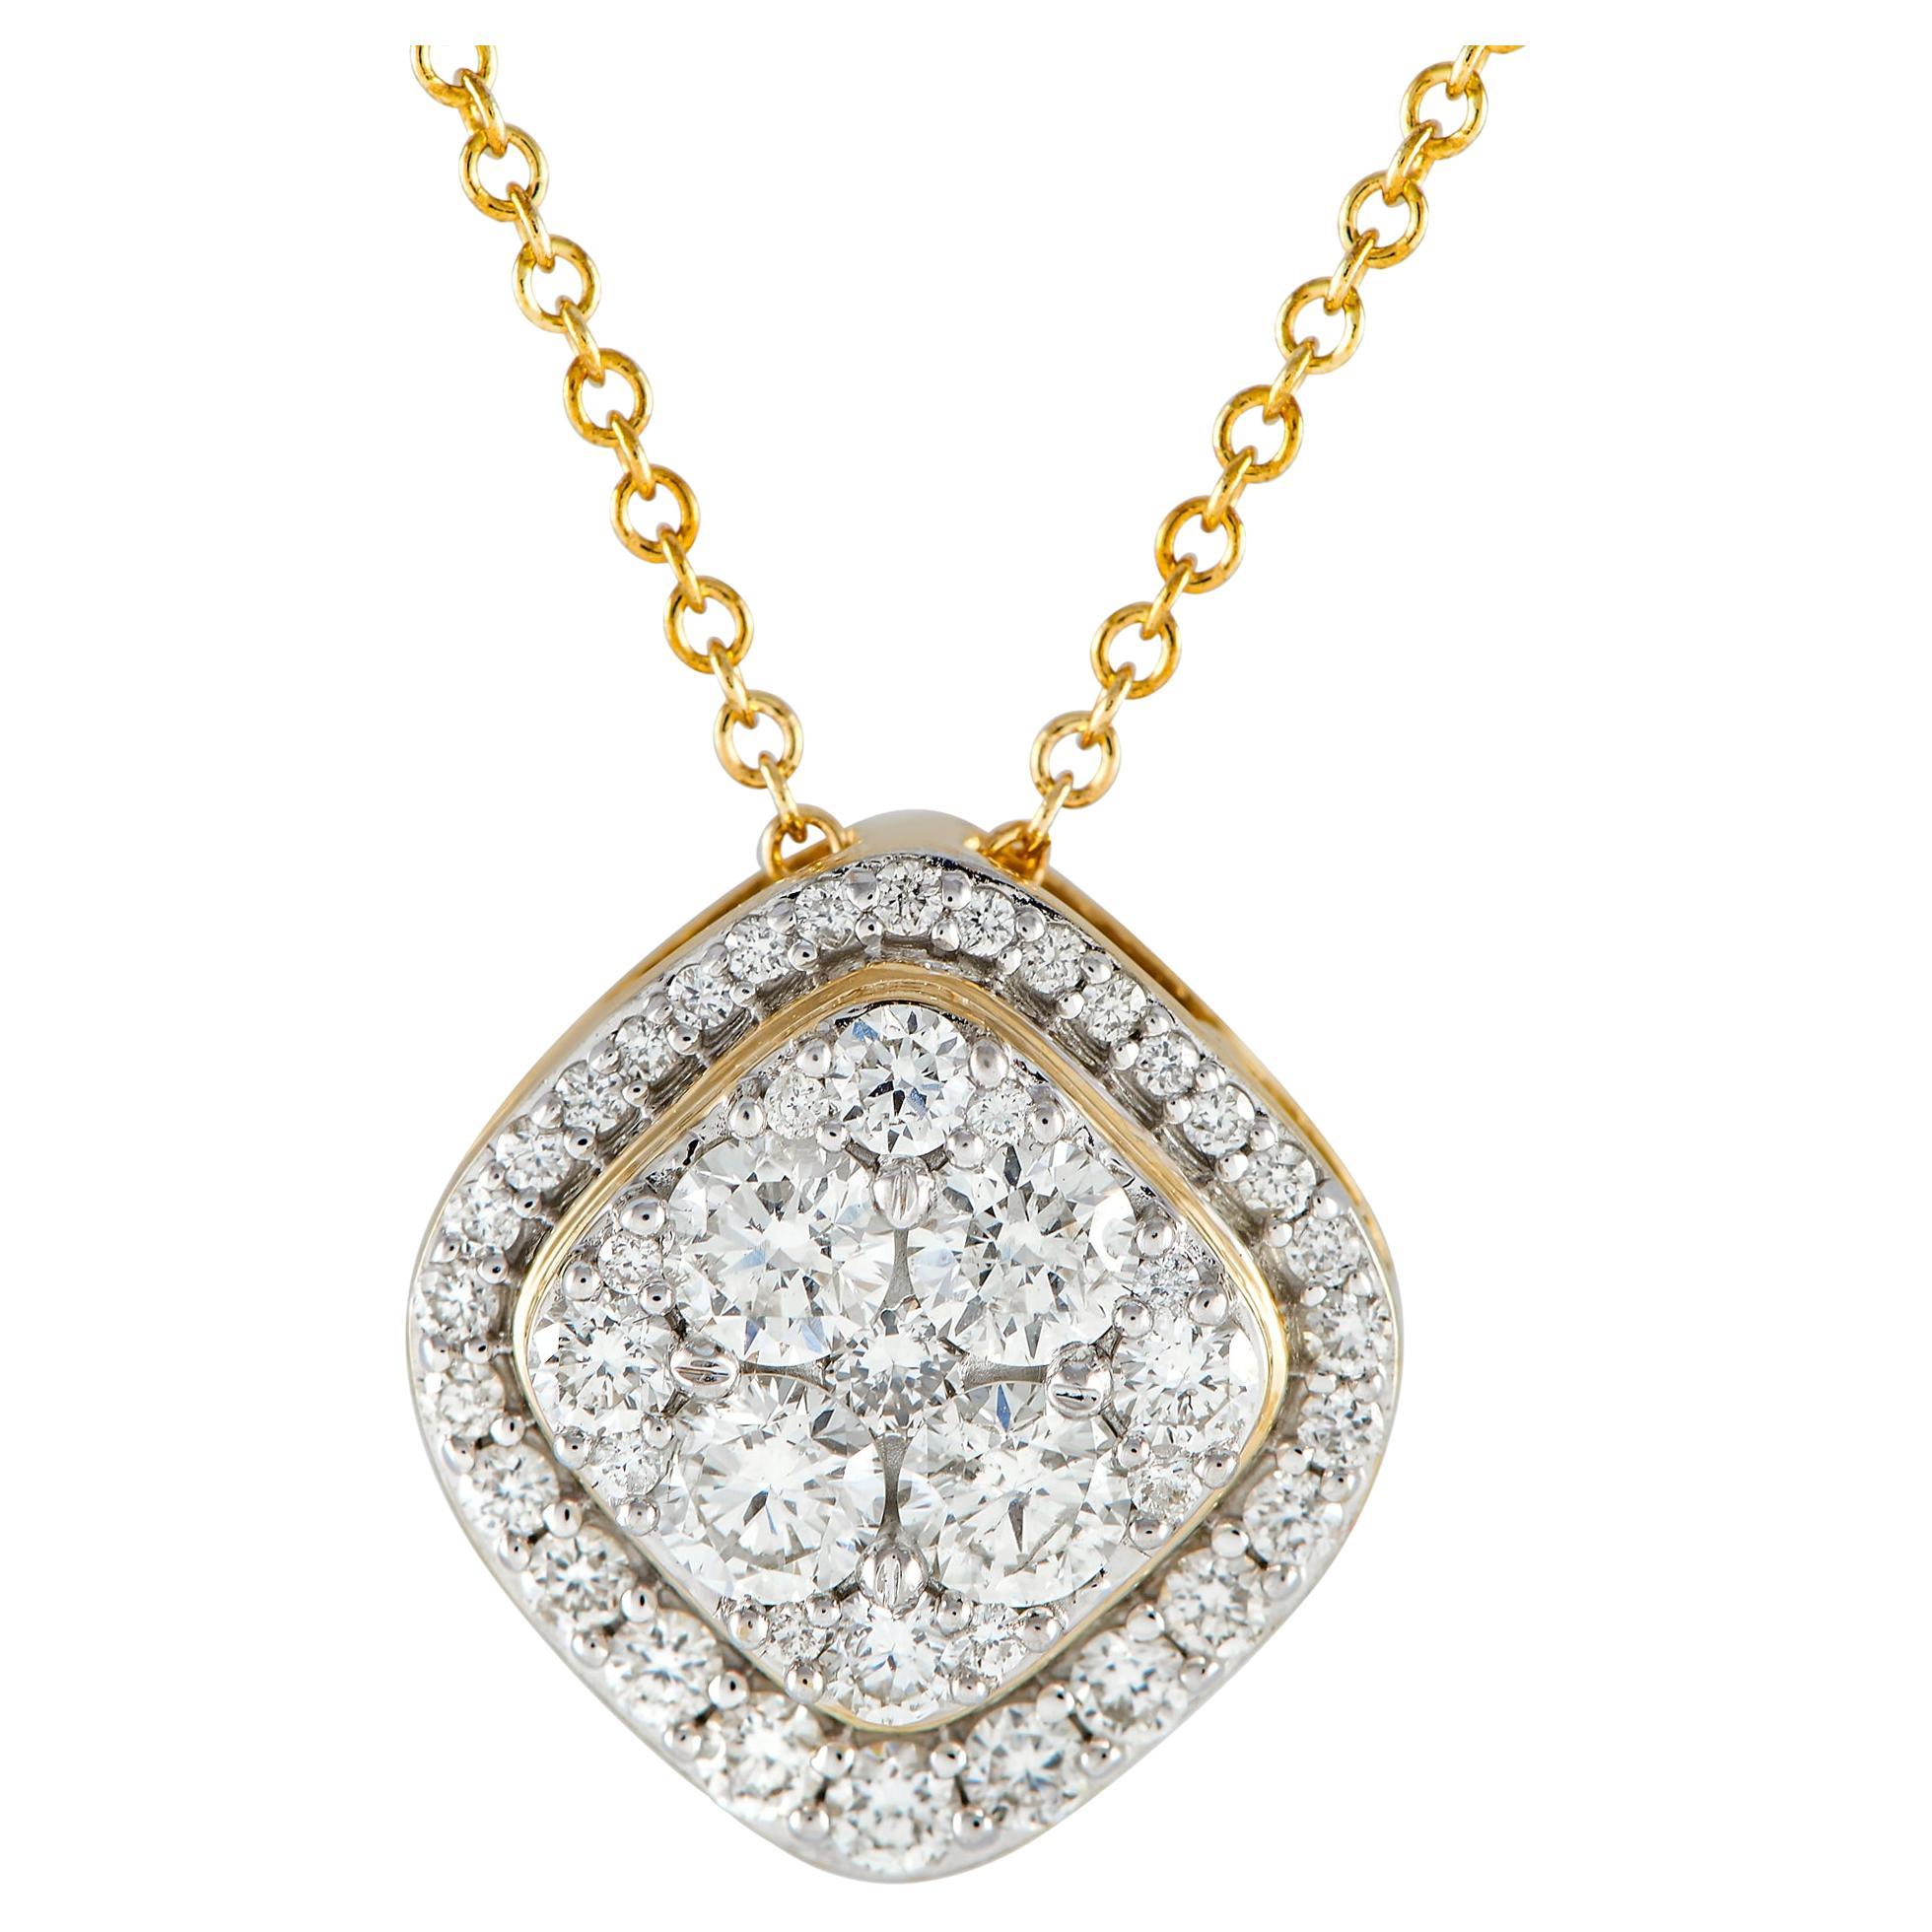 LB Exclusive 14k Yellow Gold 1.0 Carat Diamond Necklace For Sale